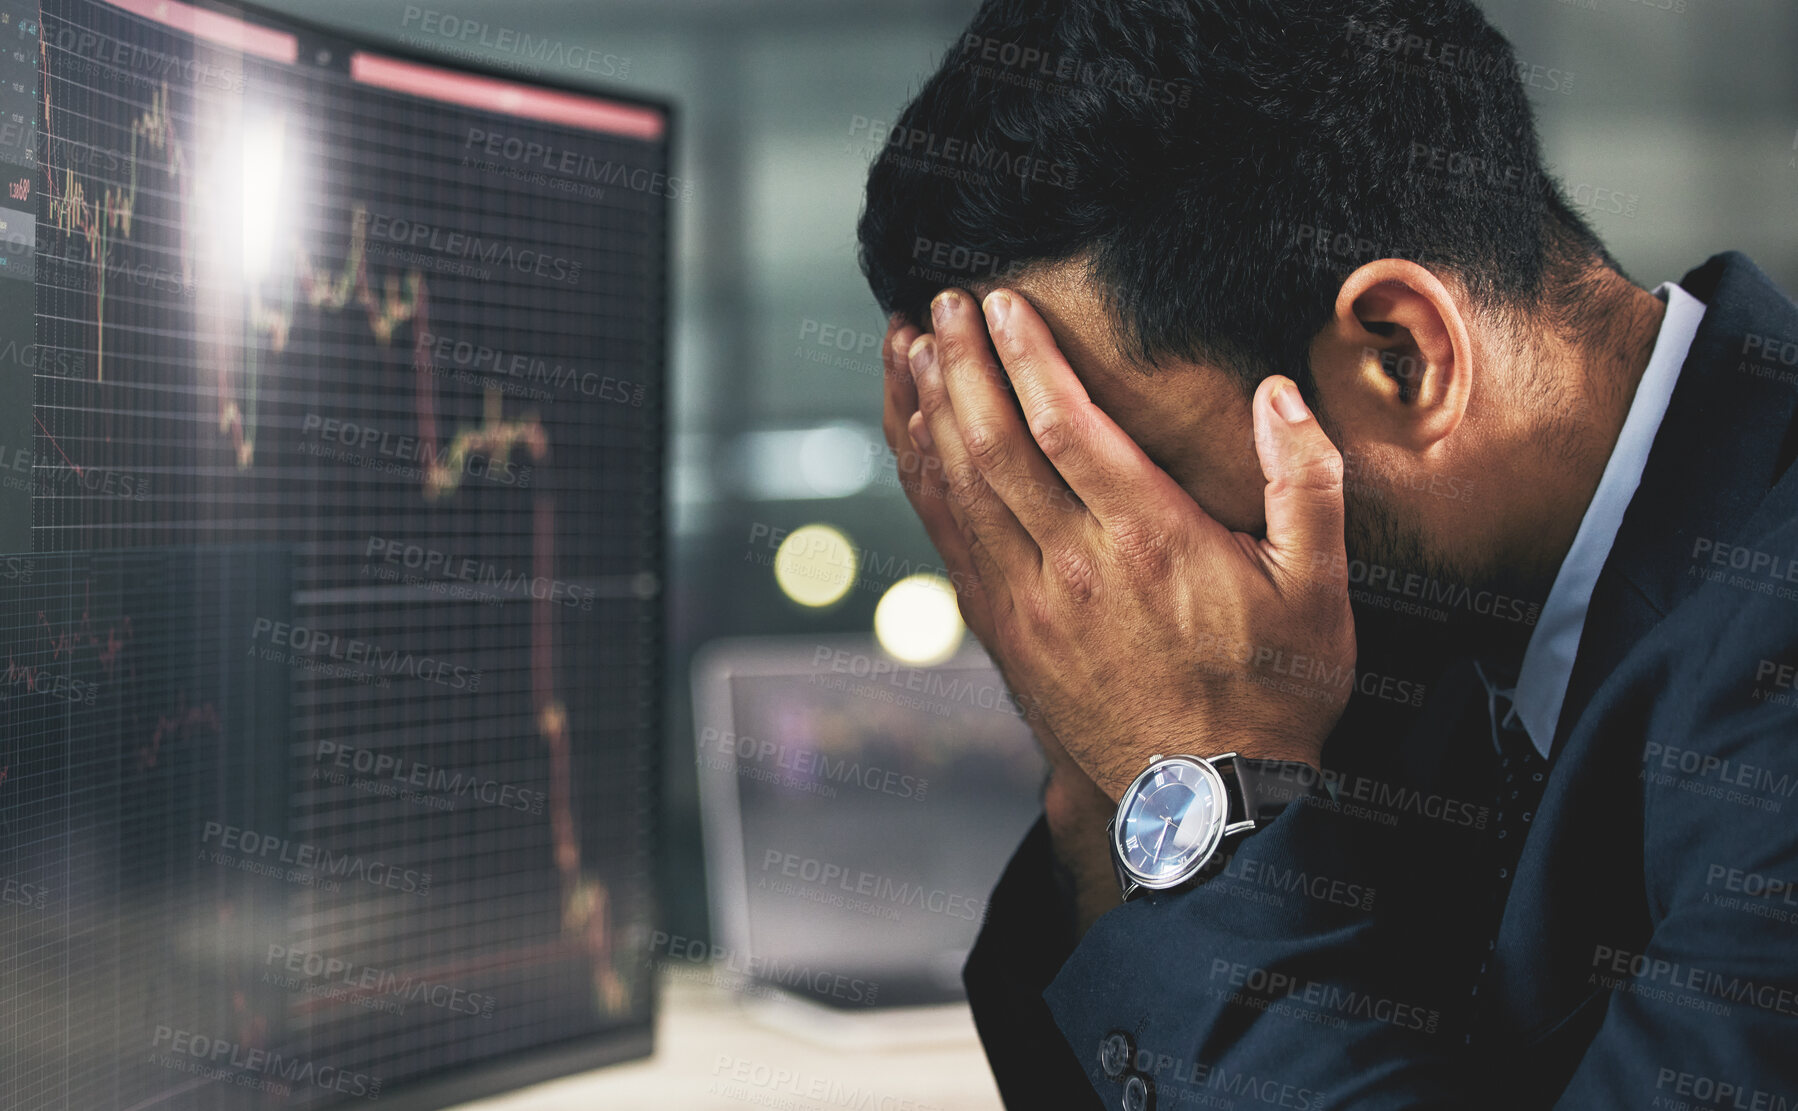 Buy stock photo Shot of a young stock market expert looking stressed out at work